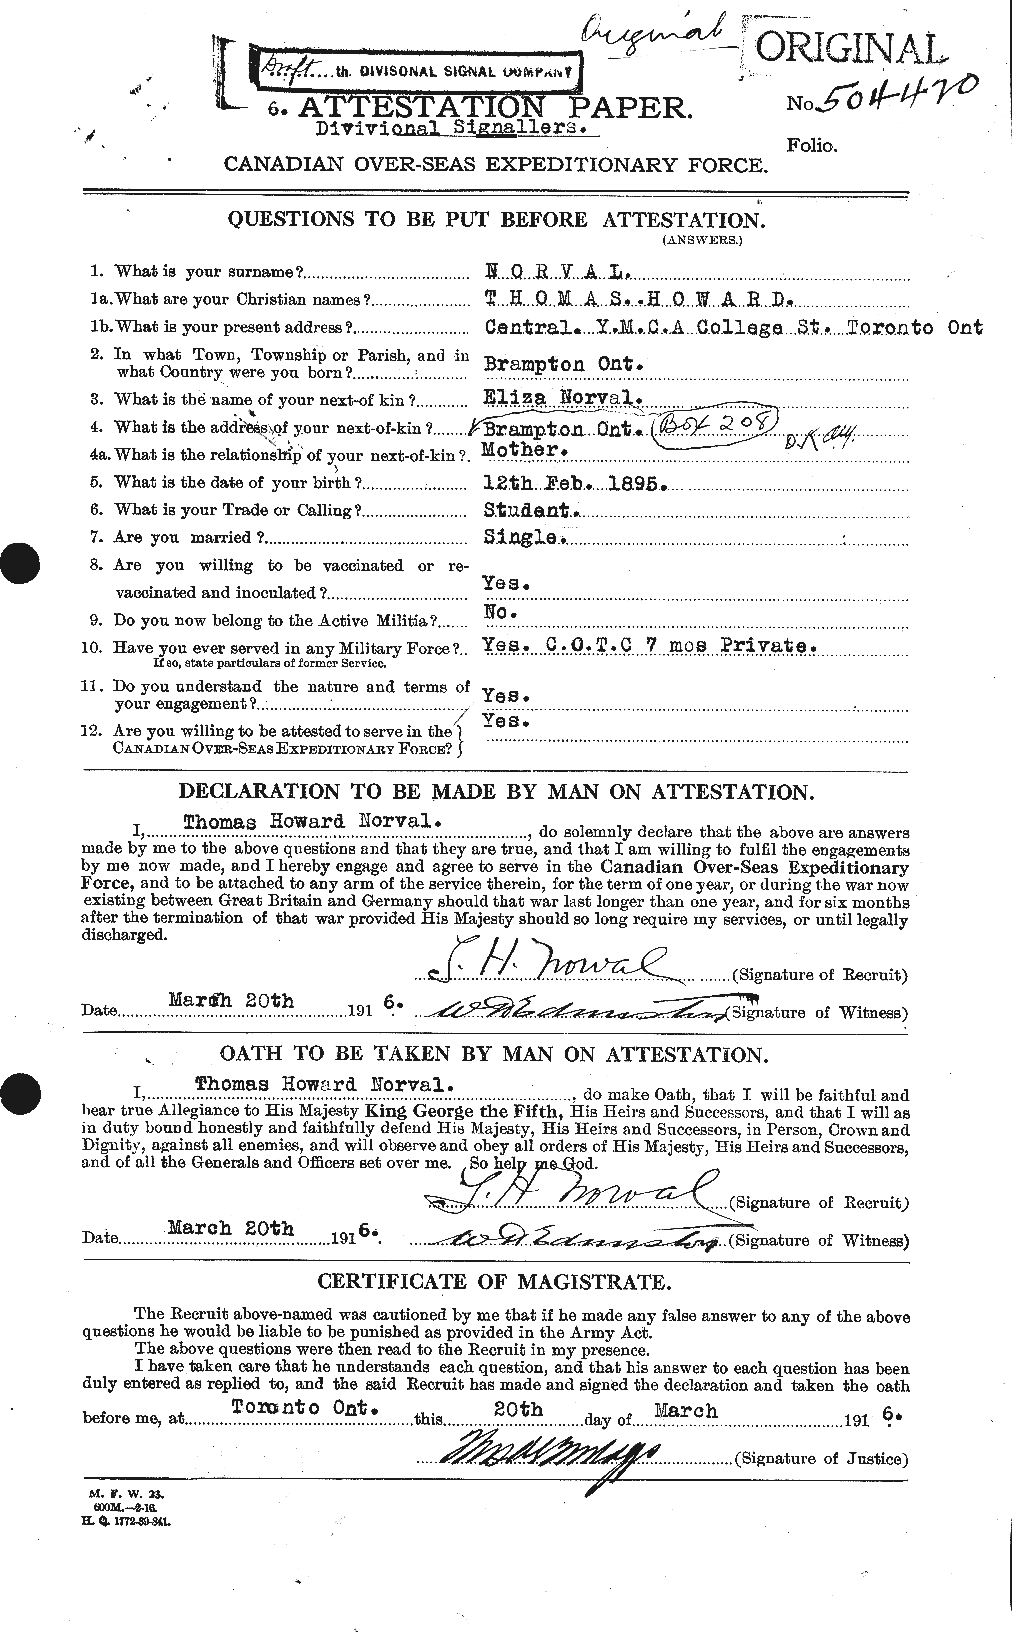 Personnel Records of the First World War - CEF 551894a